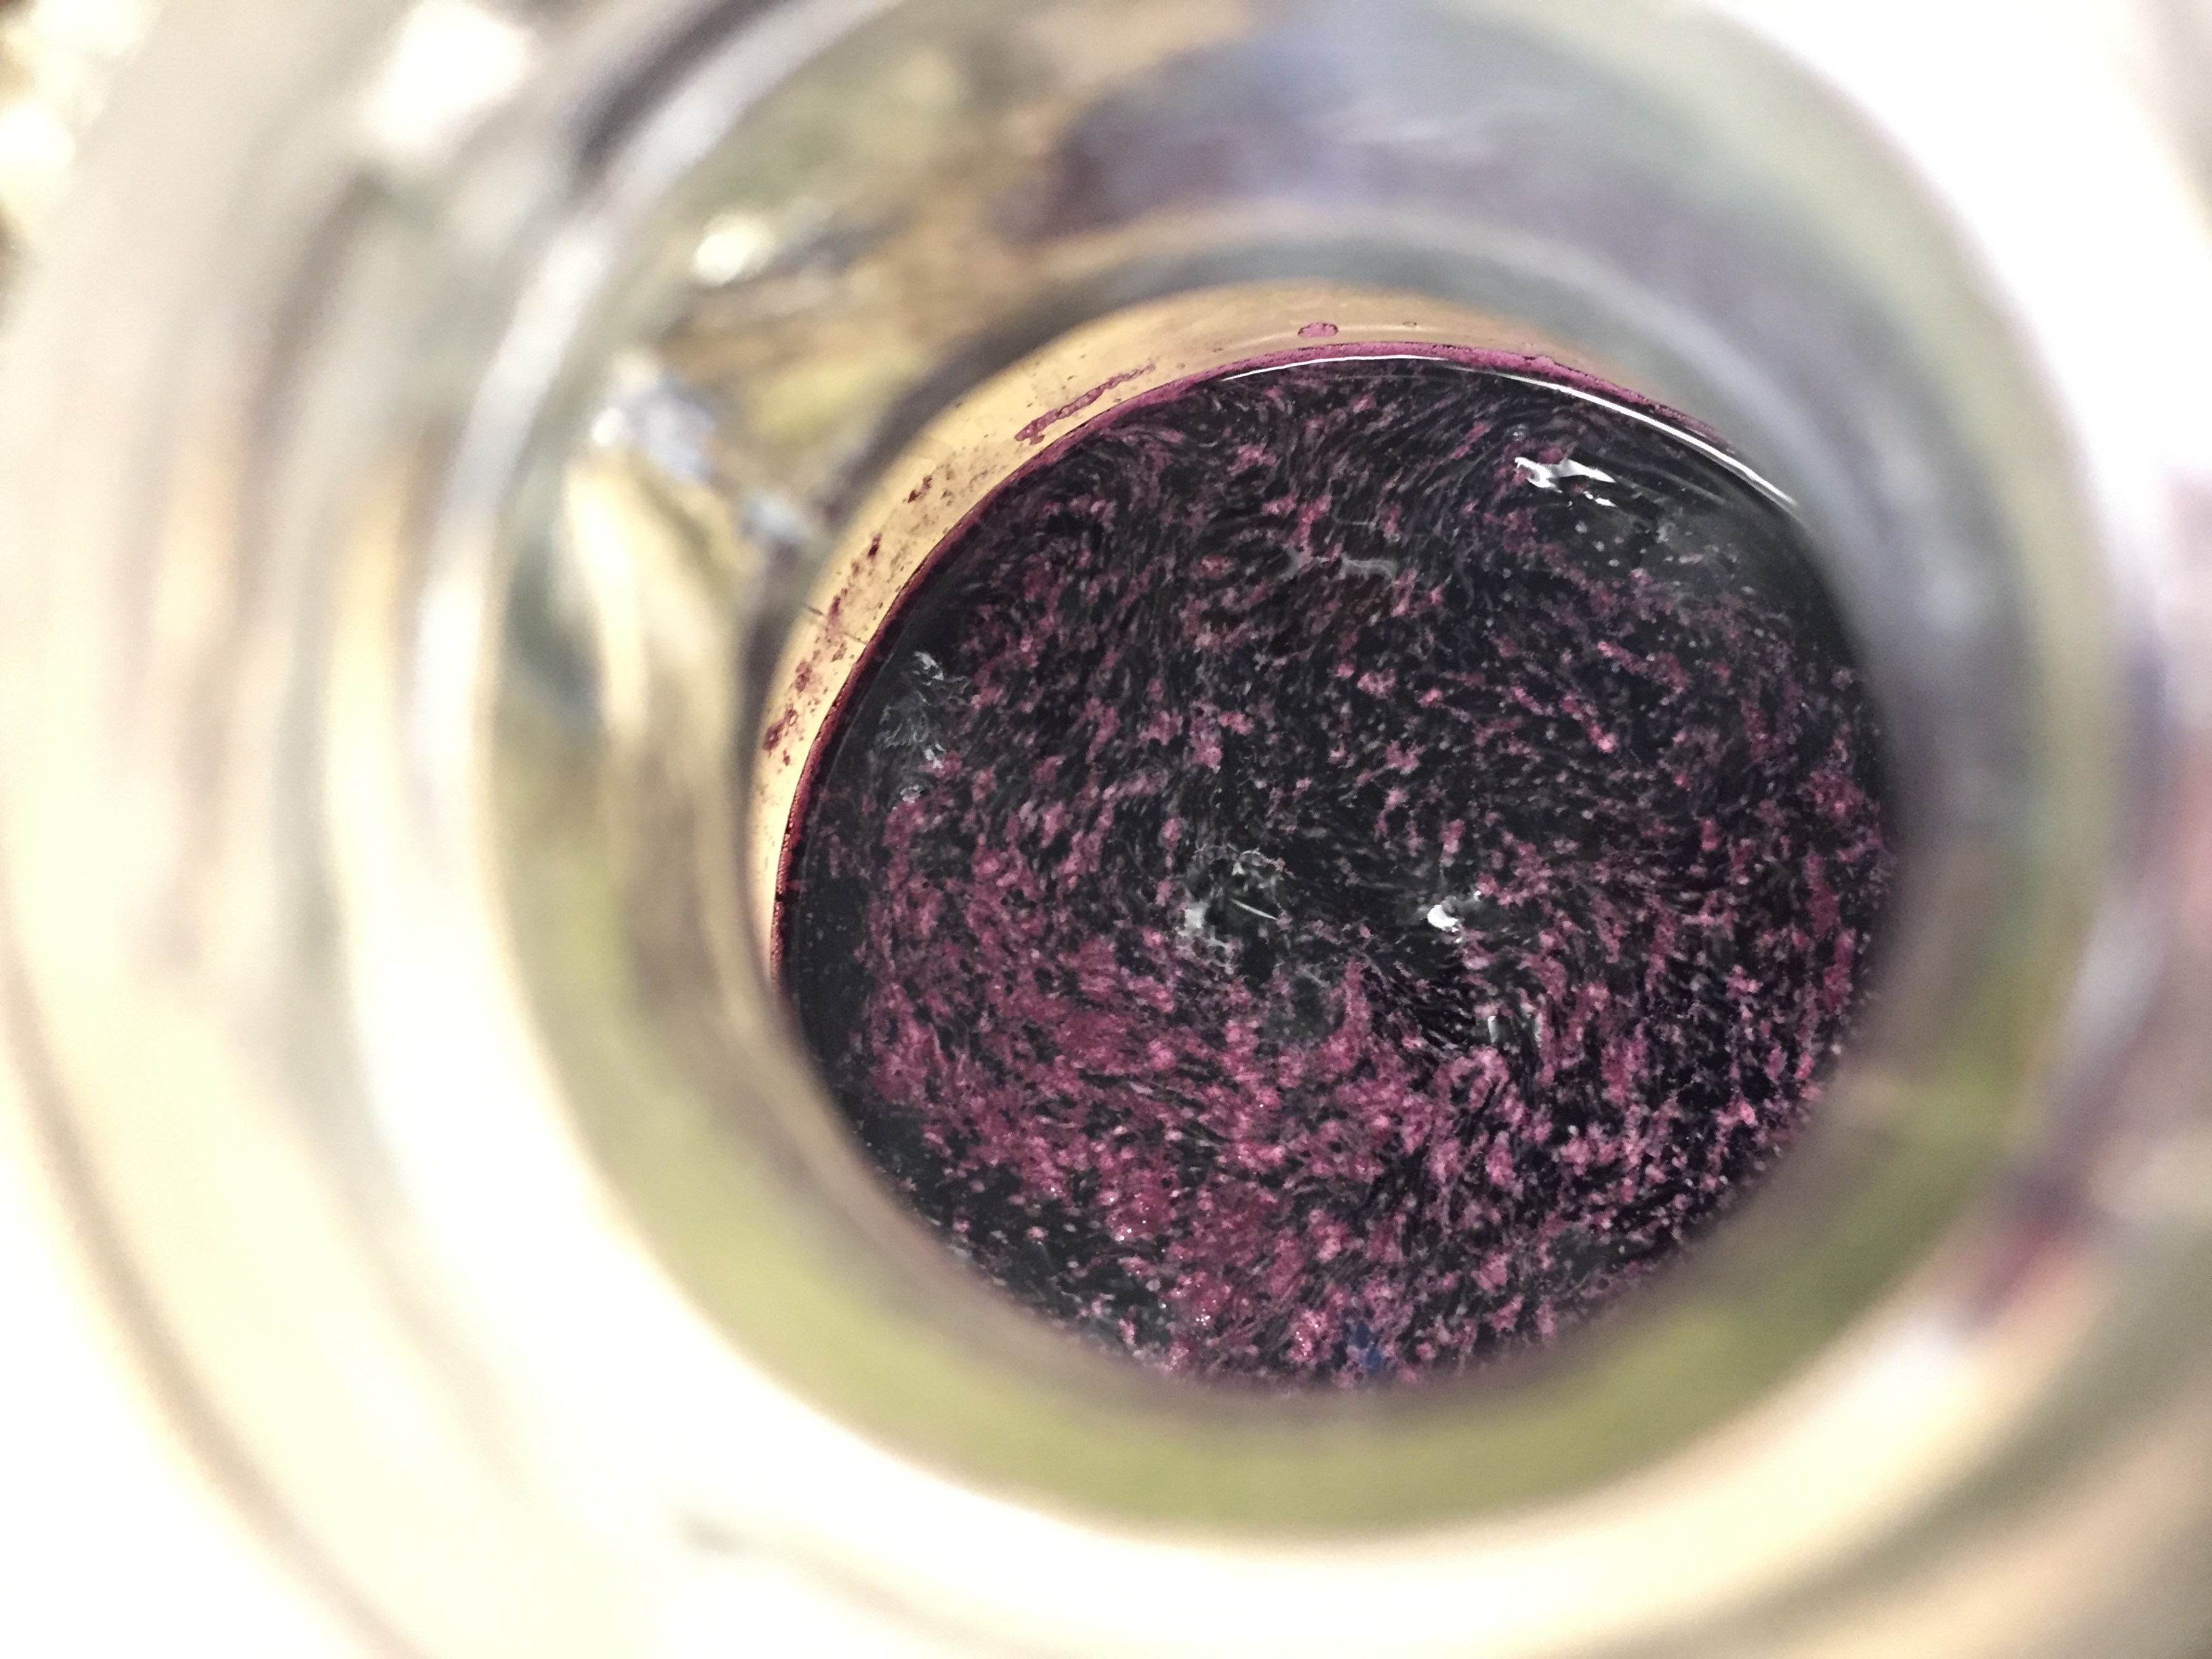 Looking into wine fermentation vessel. Red win infected with a layer of surface mold.